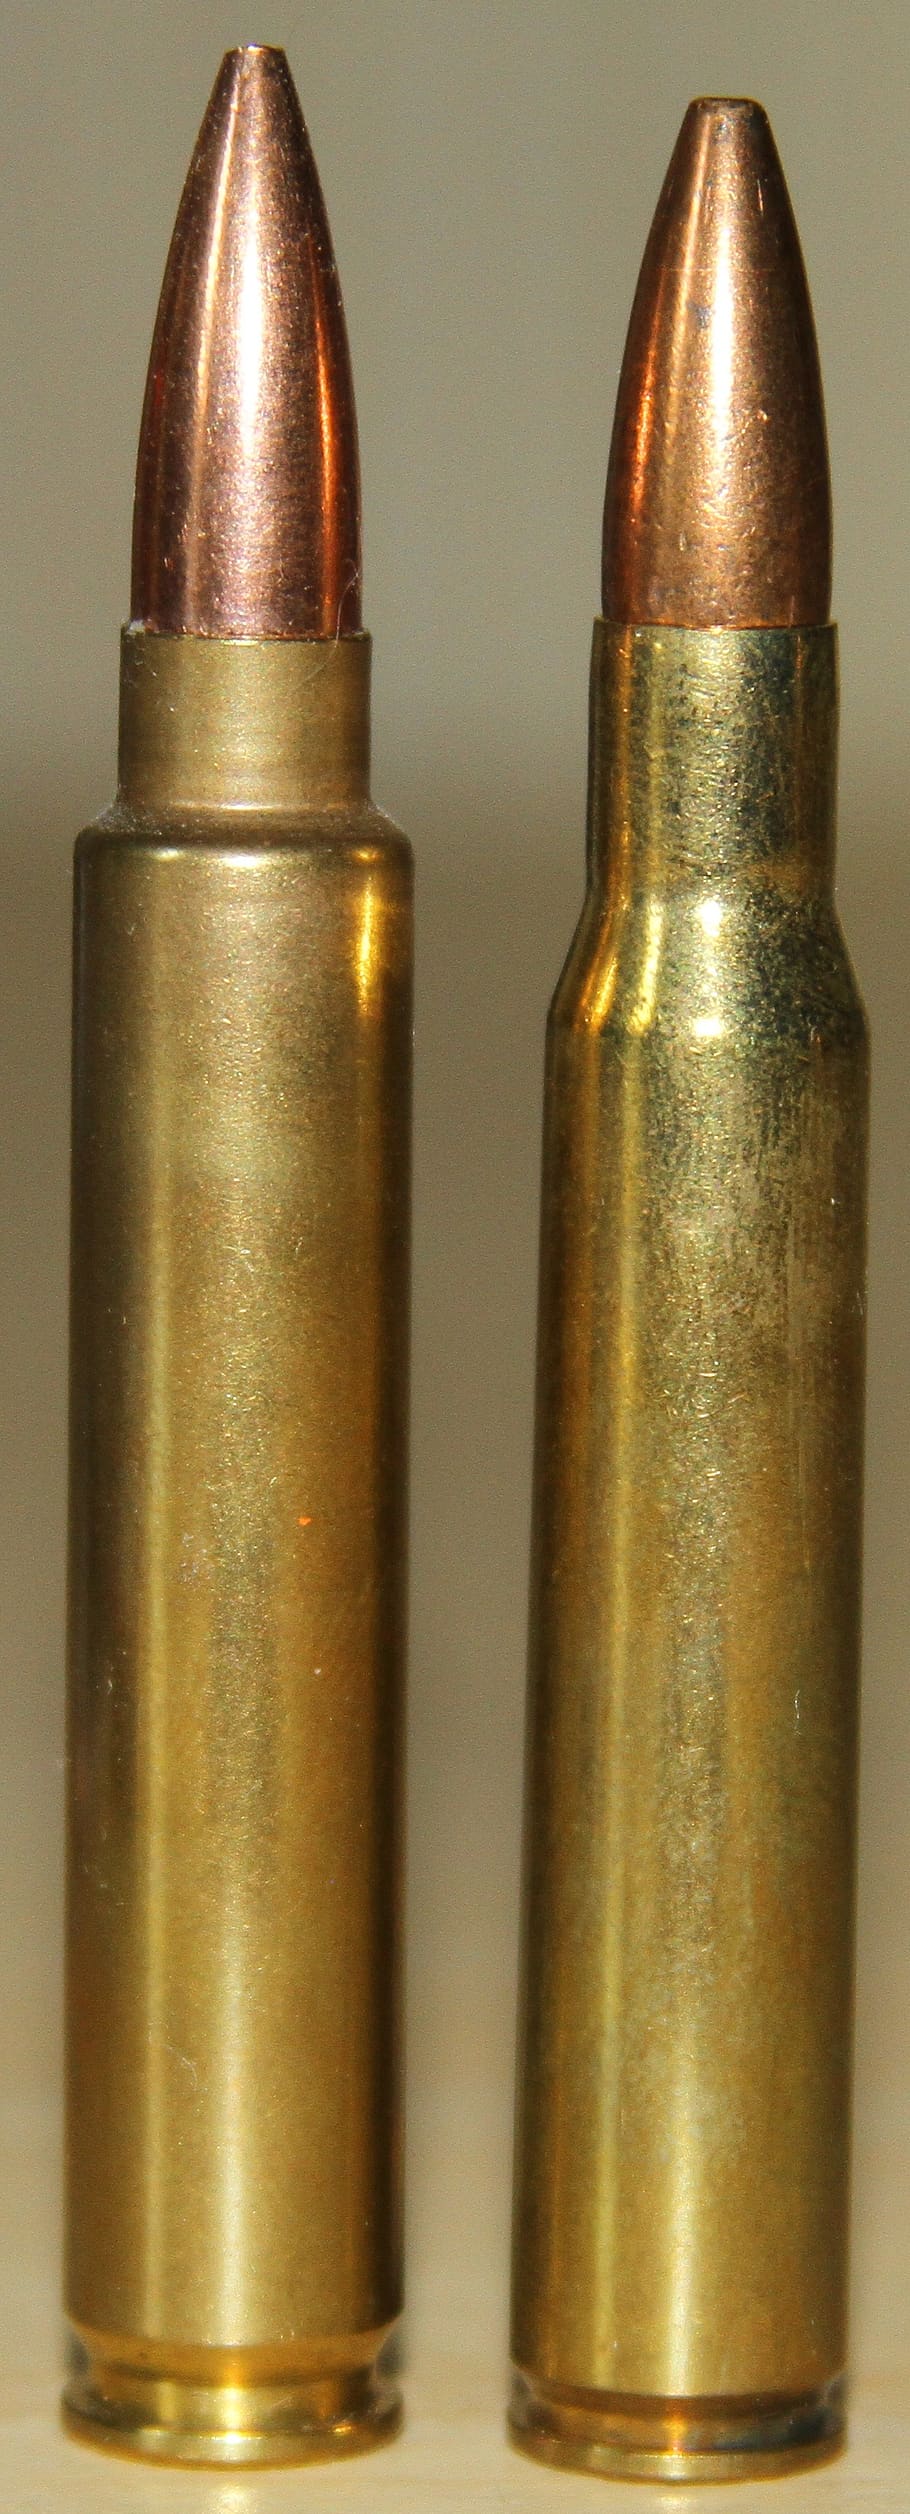 cartridge, bullet, ammunition, brass, copper, military, weapon, shooting, indoors, close-up